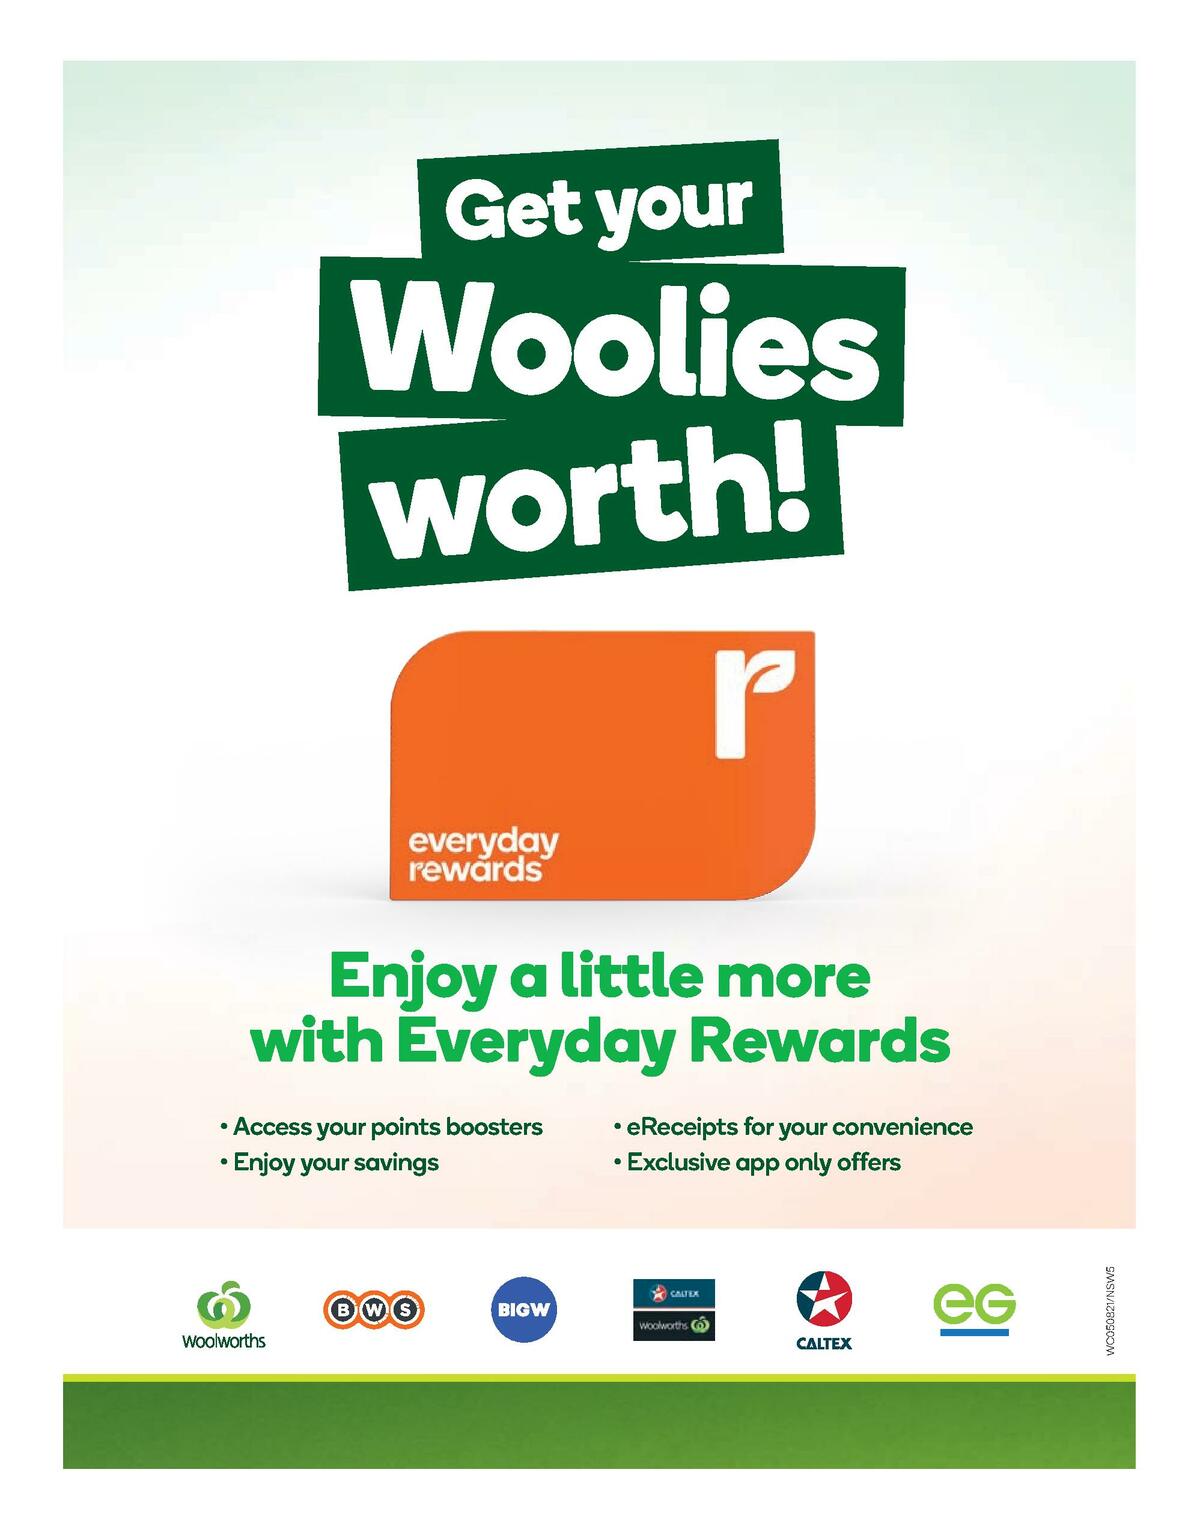 Woolworths Catalogues from 5 August